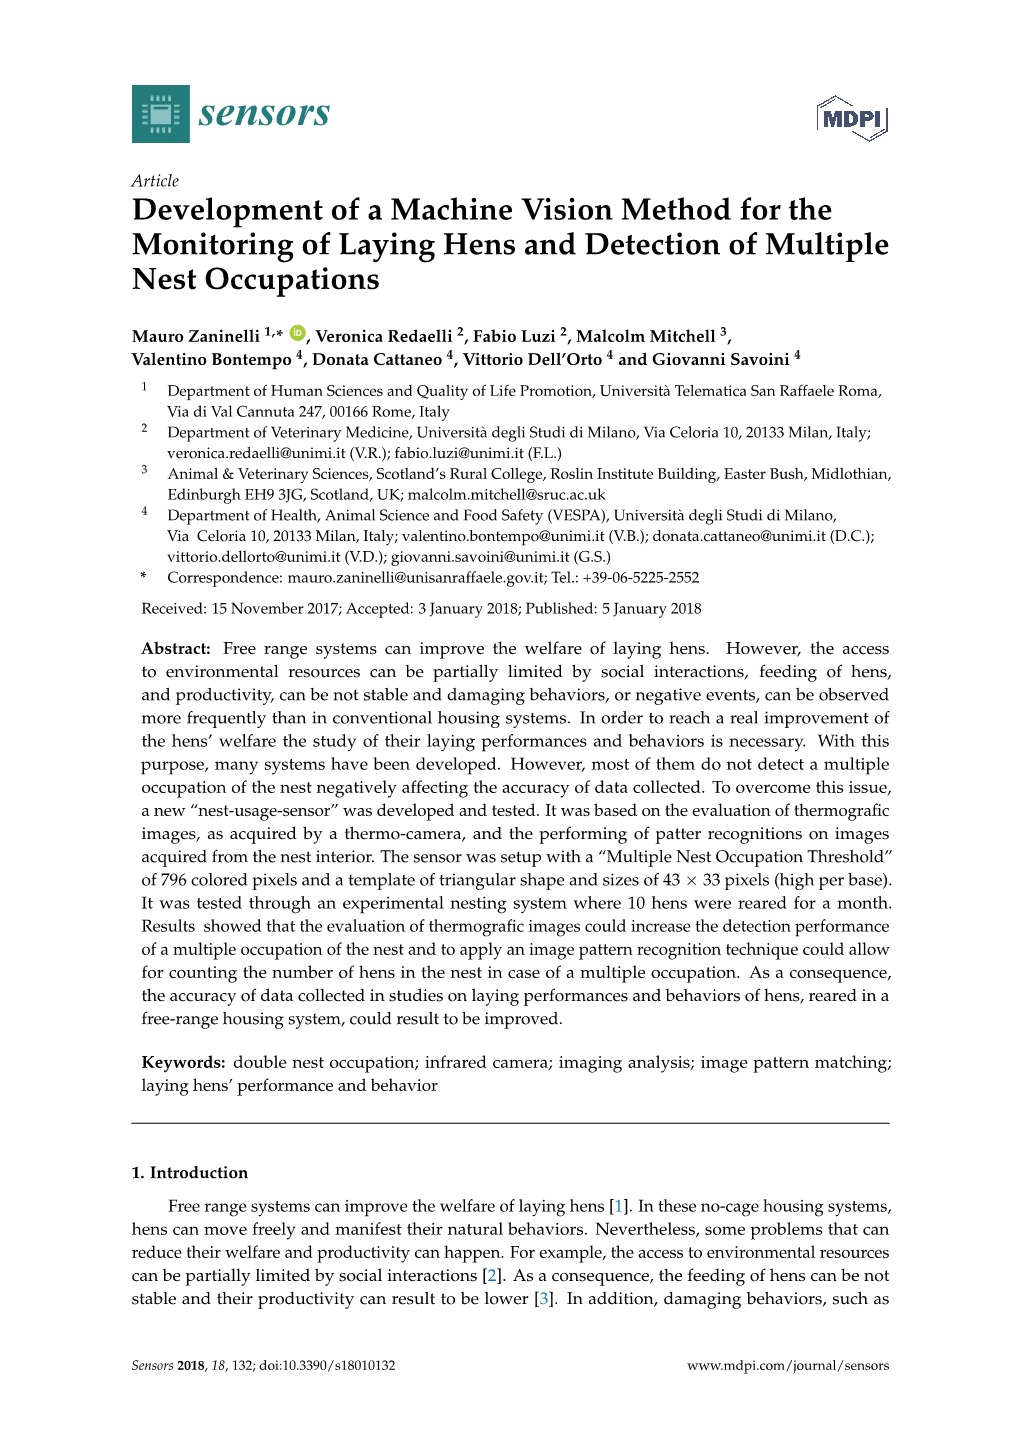 Development of a Machine Vision Method for the Monitoring of Laying Hens and Detection of Multiple Nest Occupations